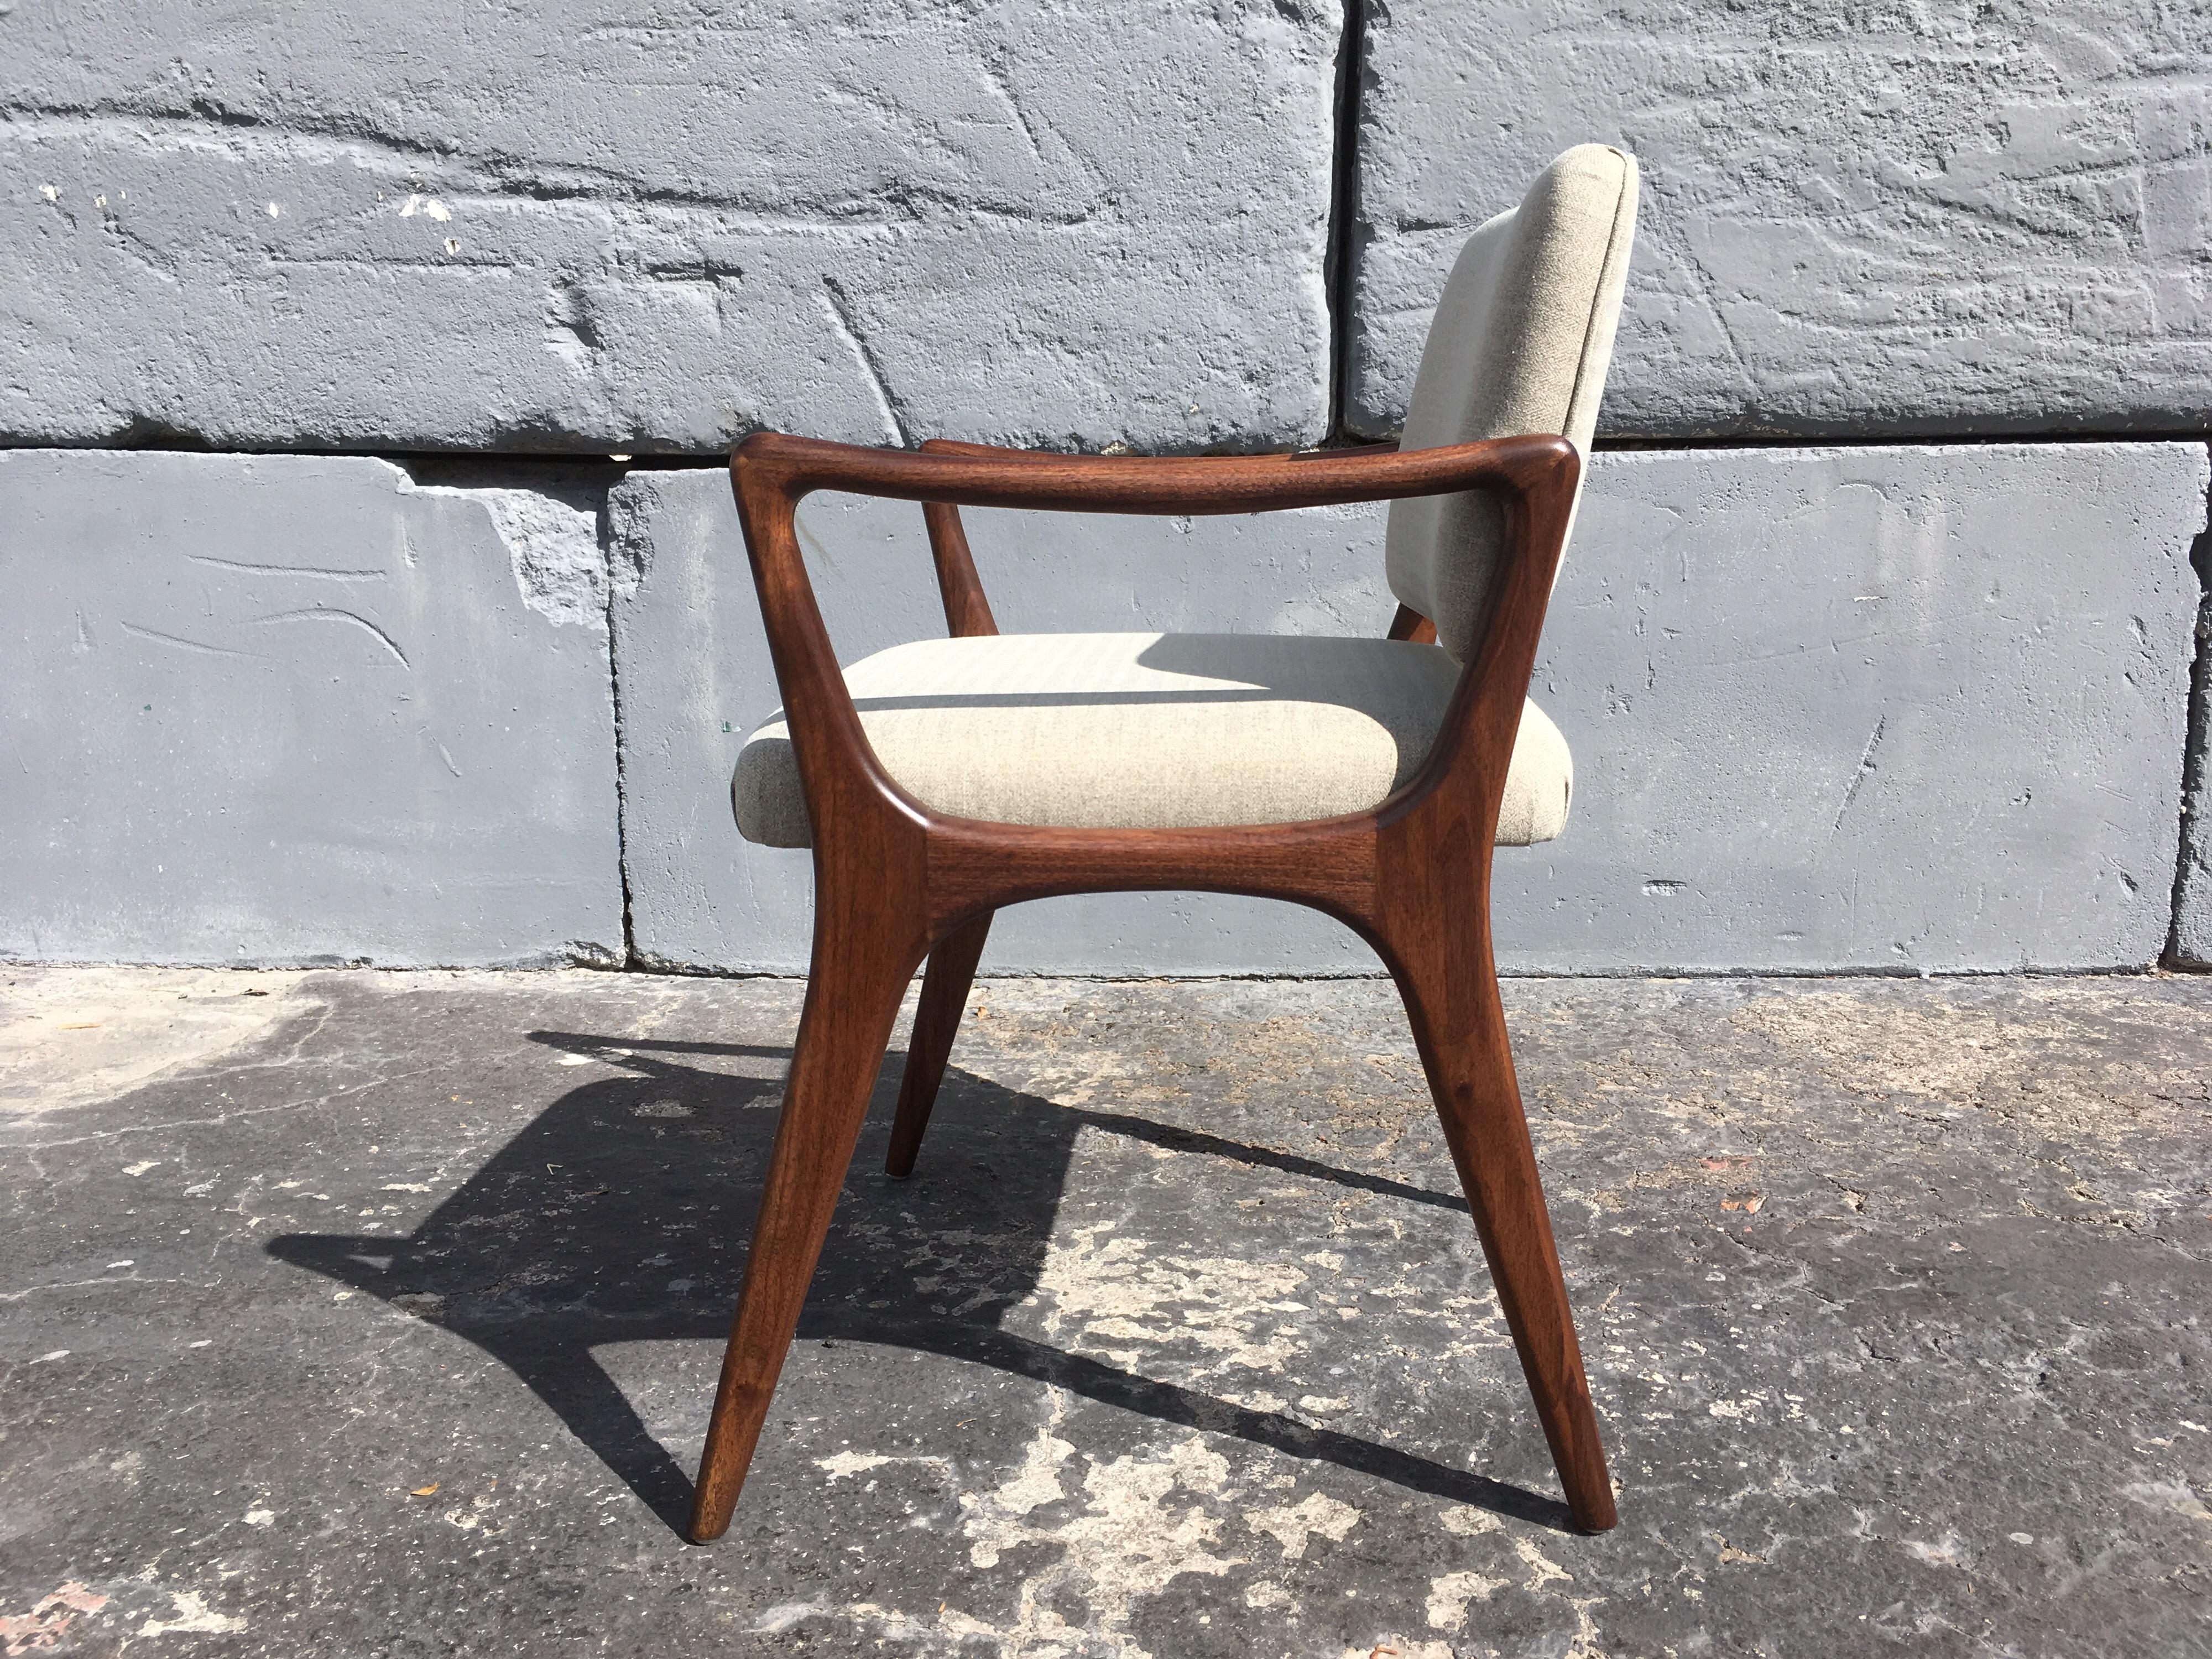 Set of six sculptural dining chairs in the style of Gio Ponti. Solid walnut frames with fabric backs and seats. Measures: Arm height is 25.25”.
More chairs available. The chairs are new, customer provides fabric.